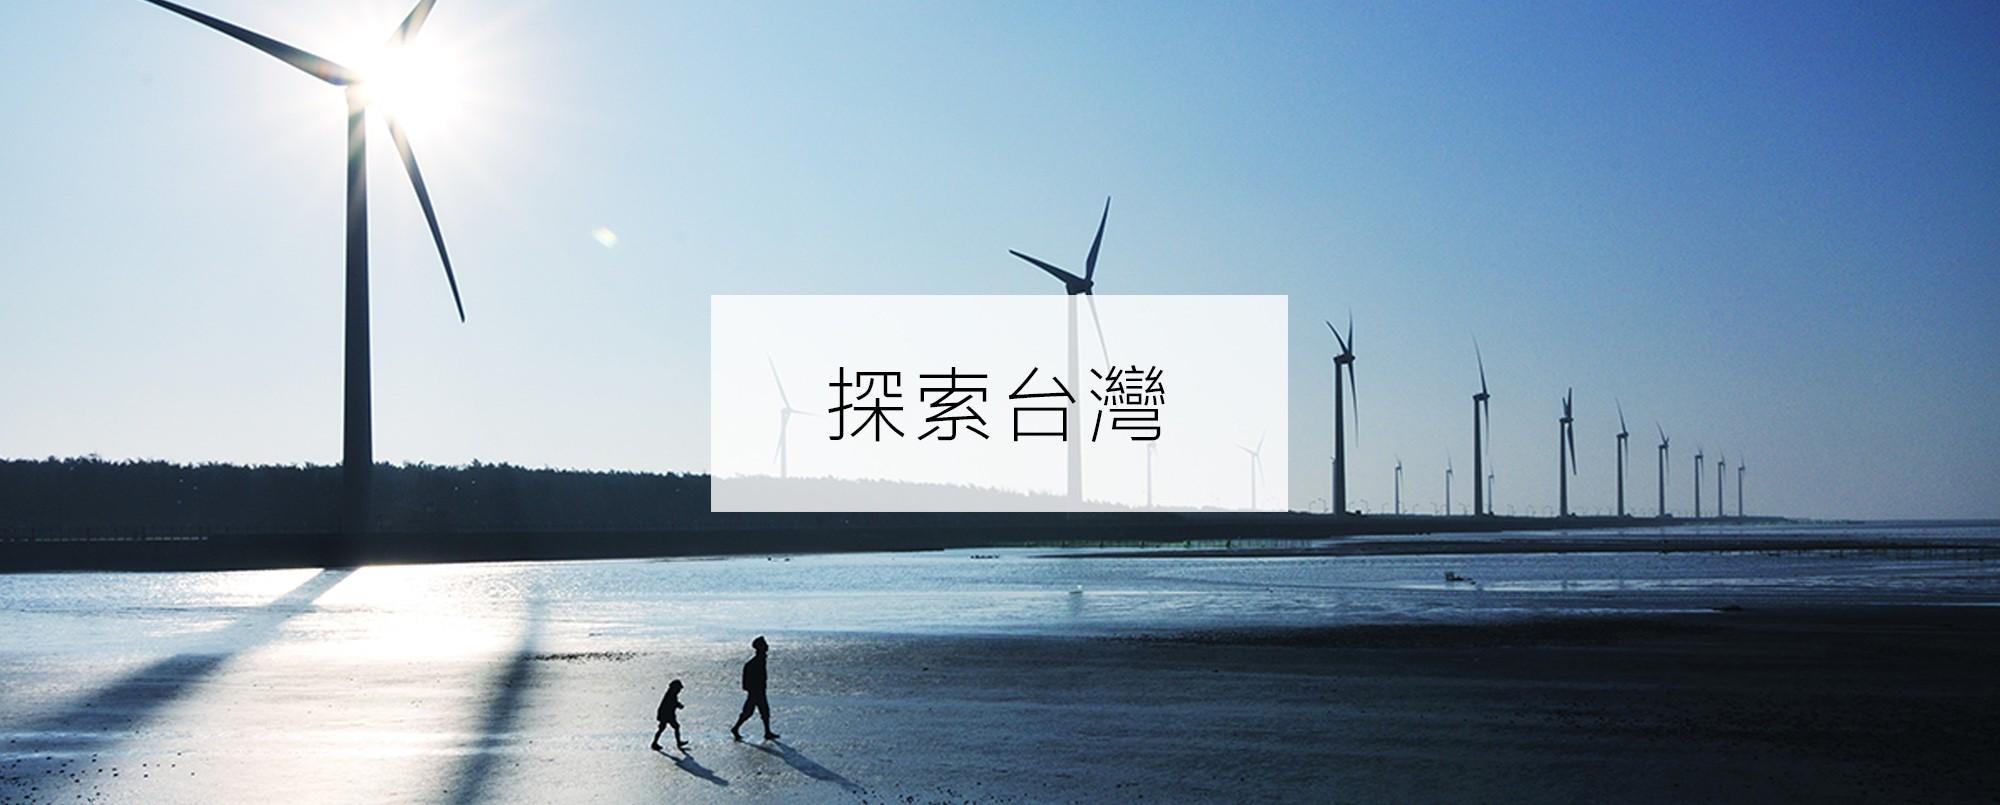 Taiwan beach with windmills at the seaside